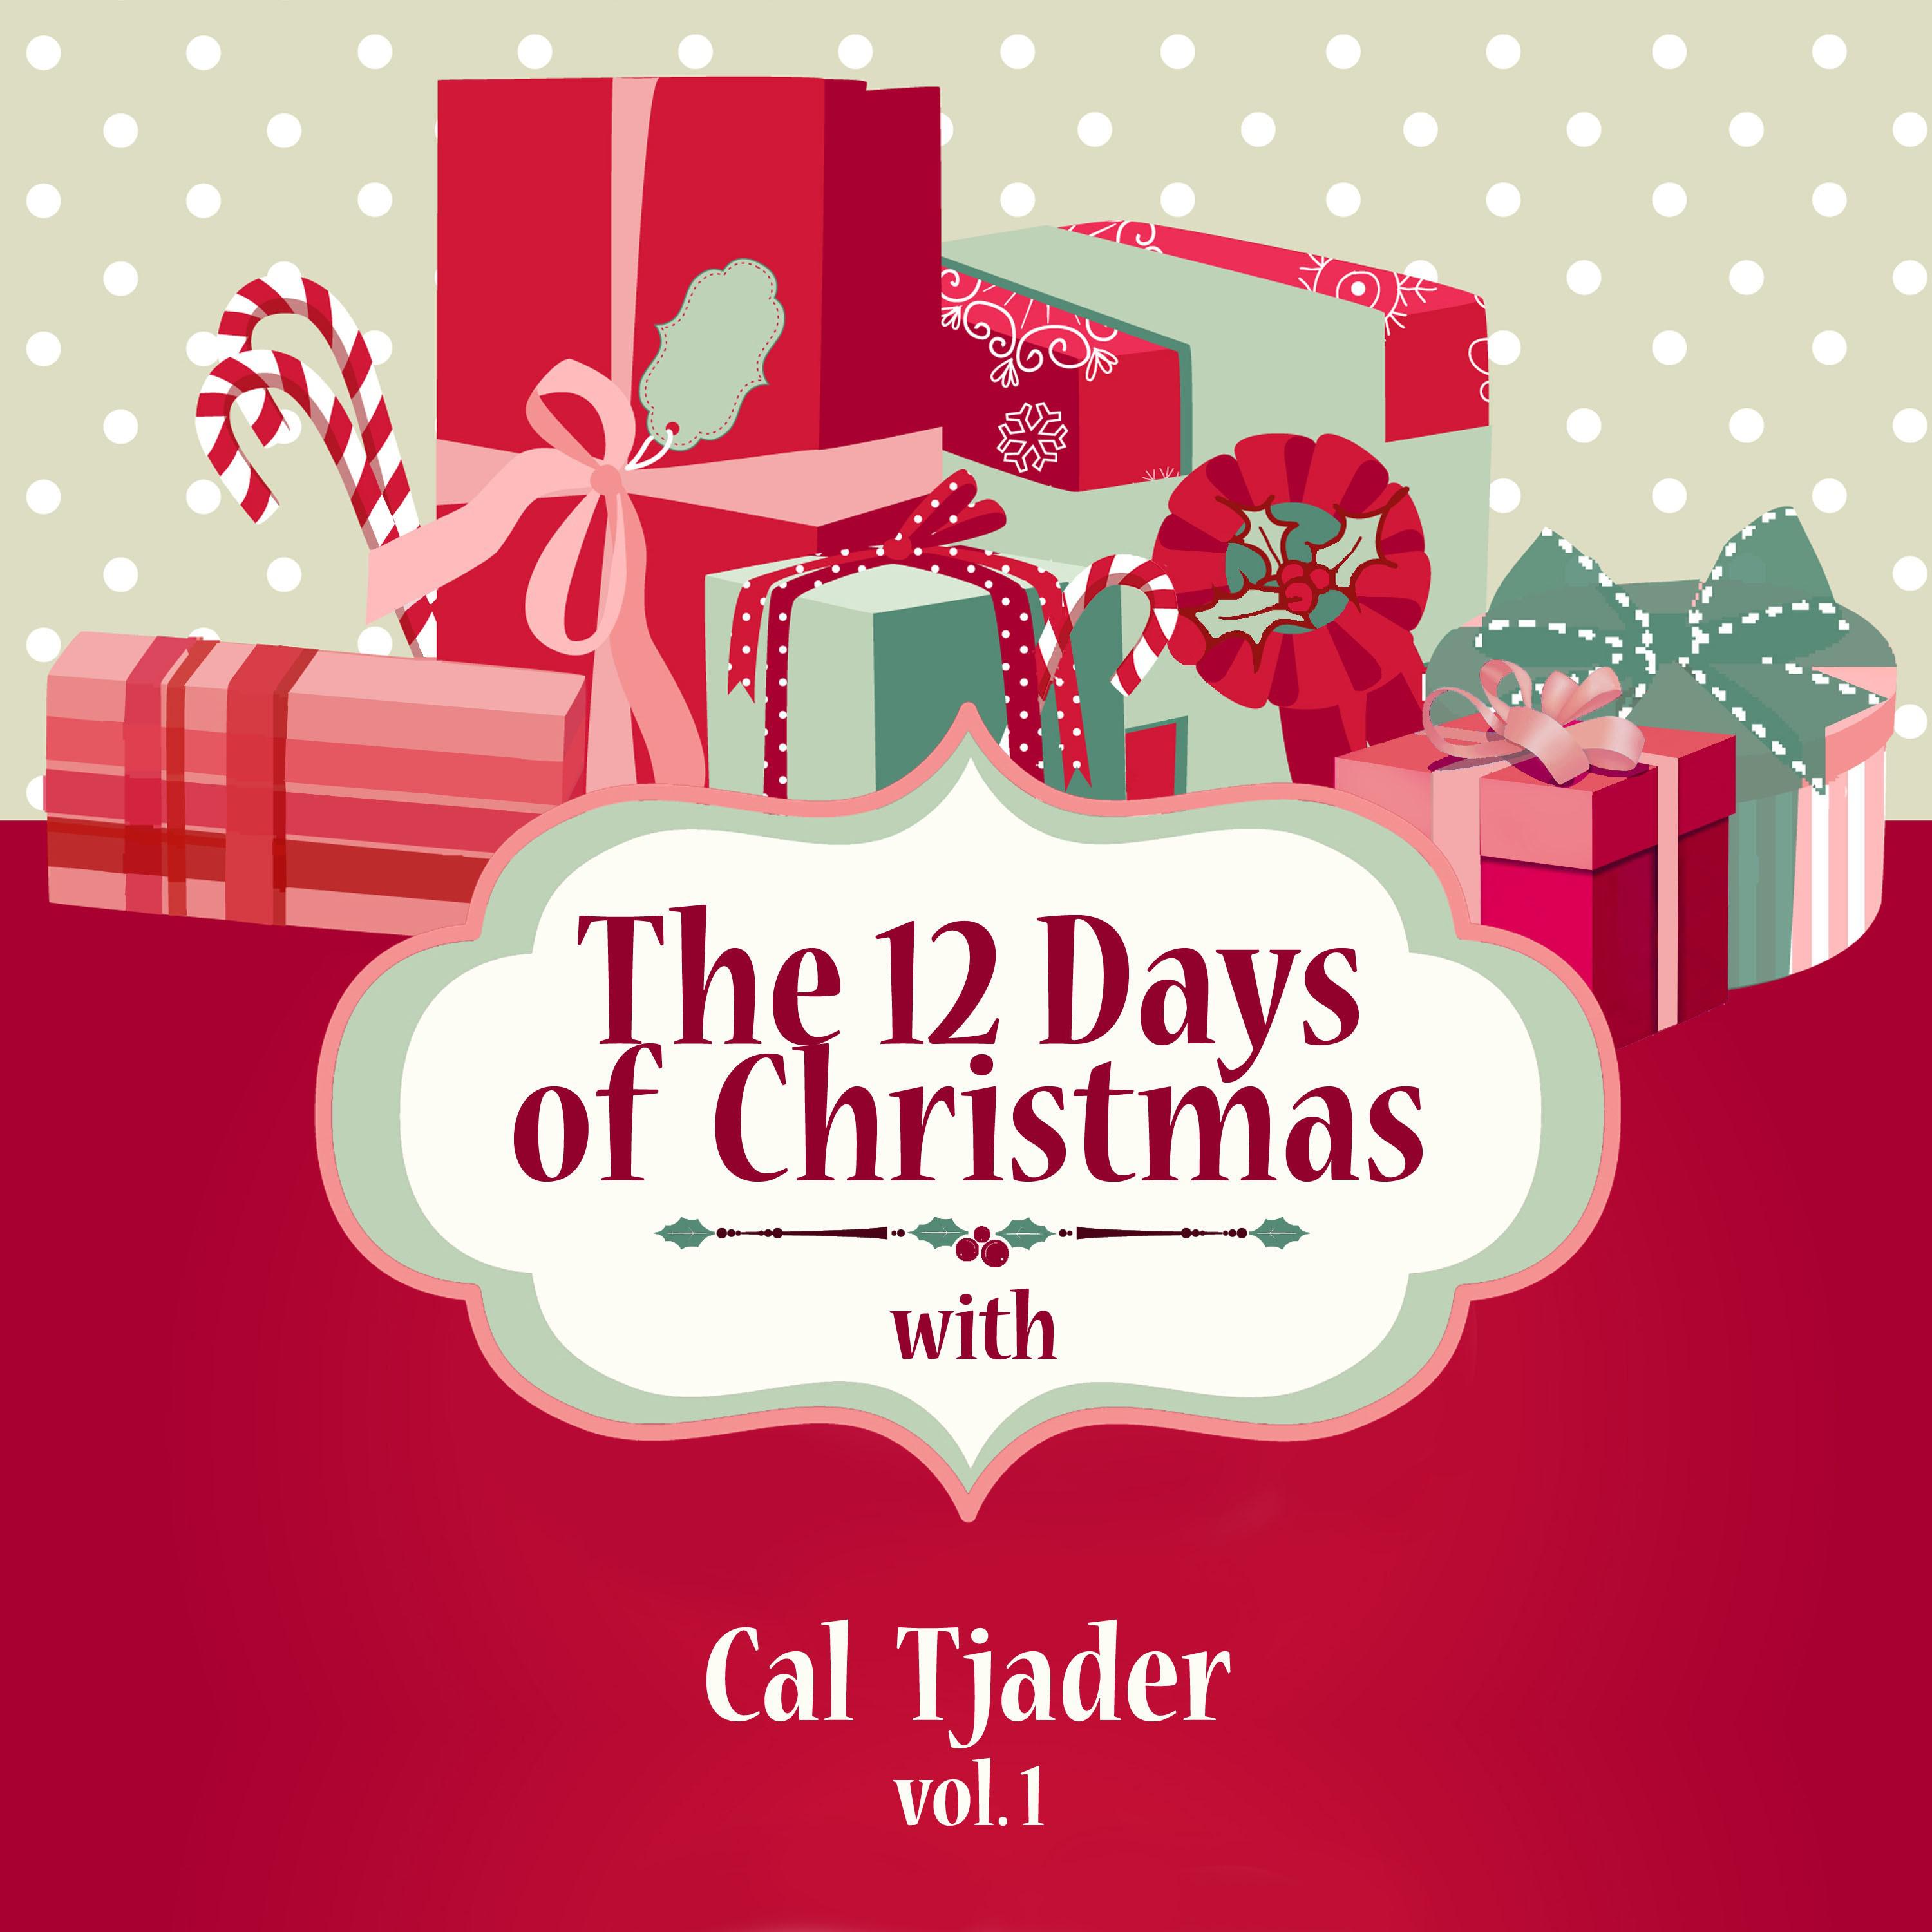 The 12 Days of Christmas with Cal Tjader, Vol. 1